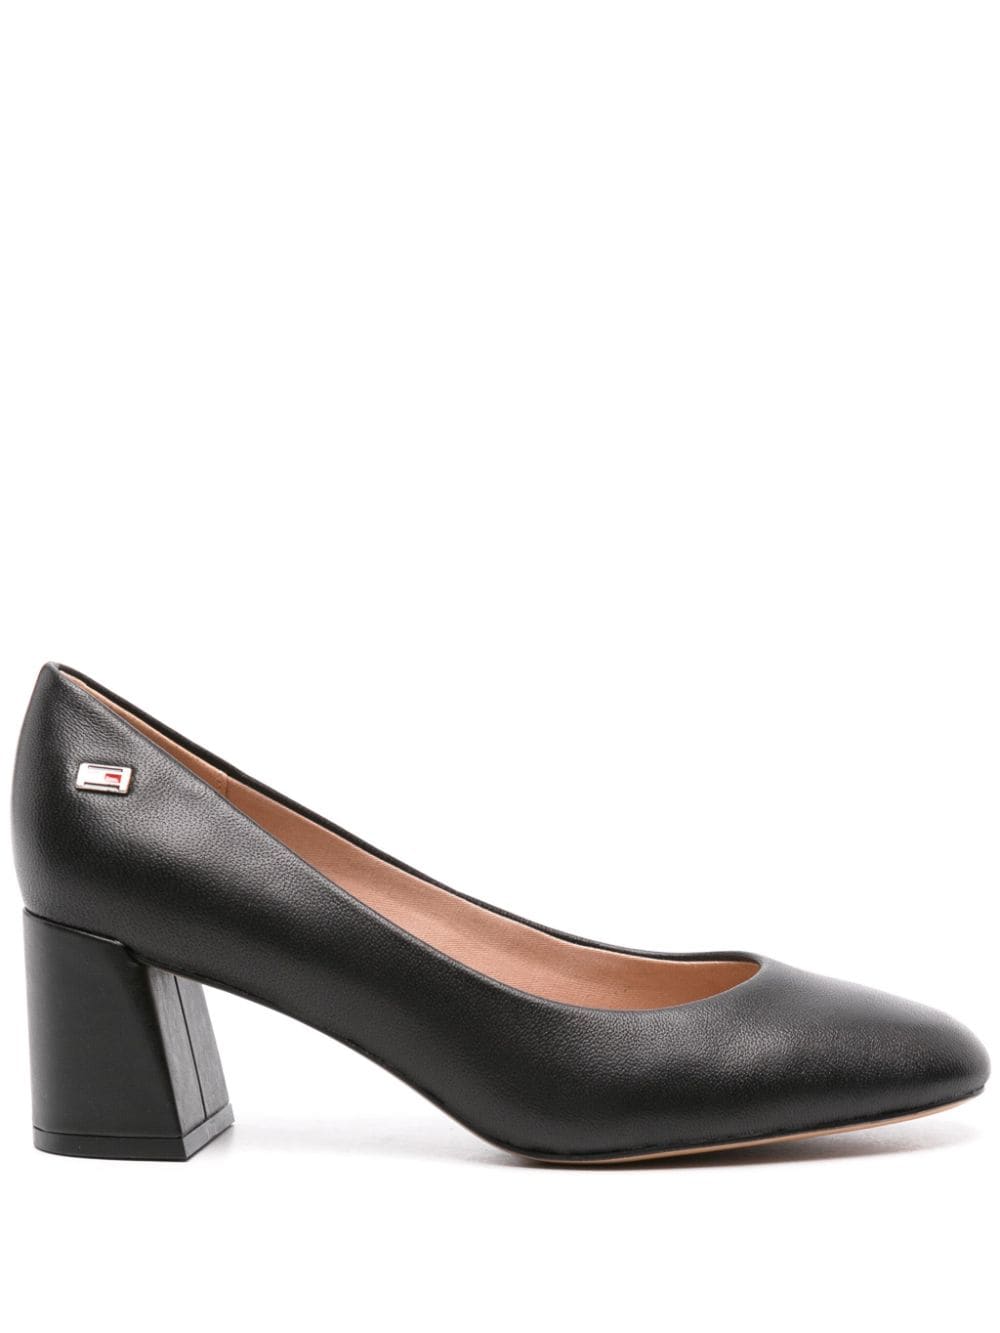 60mm square-toe leather pumps